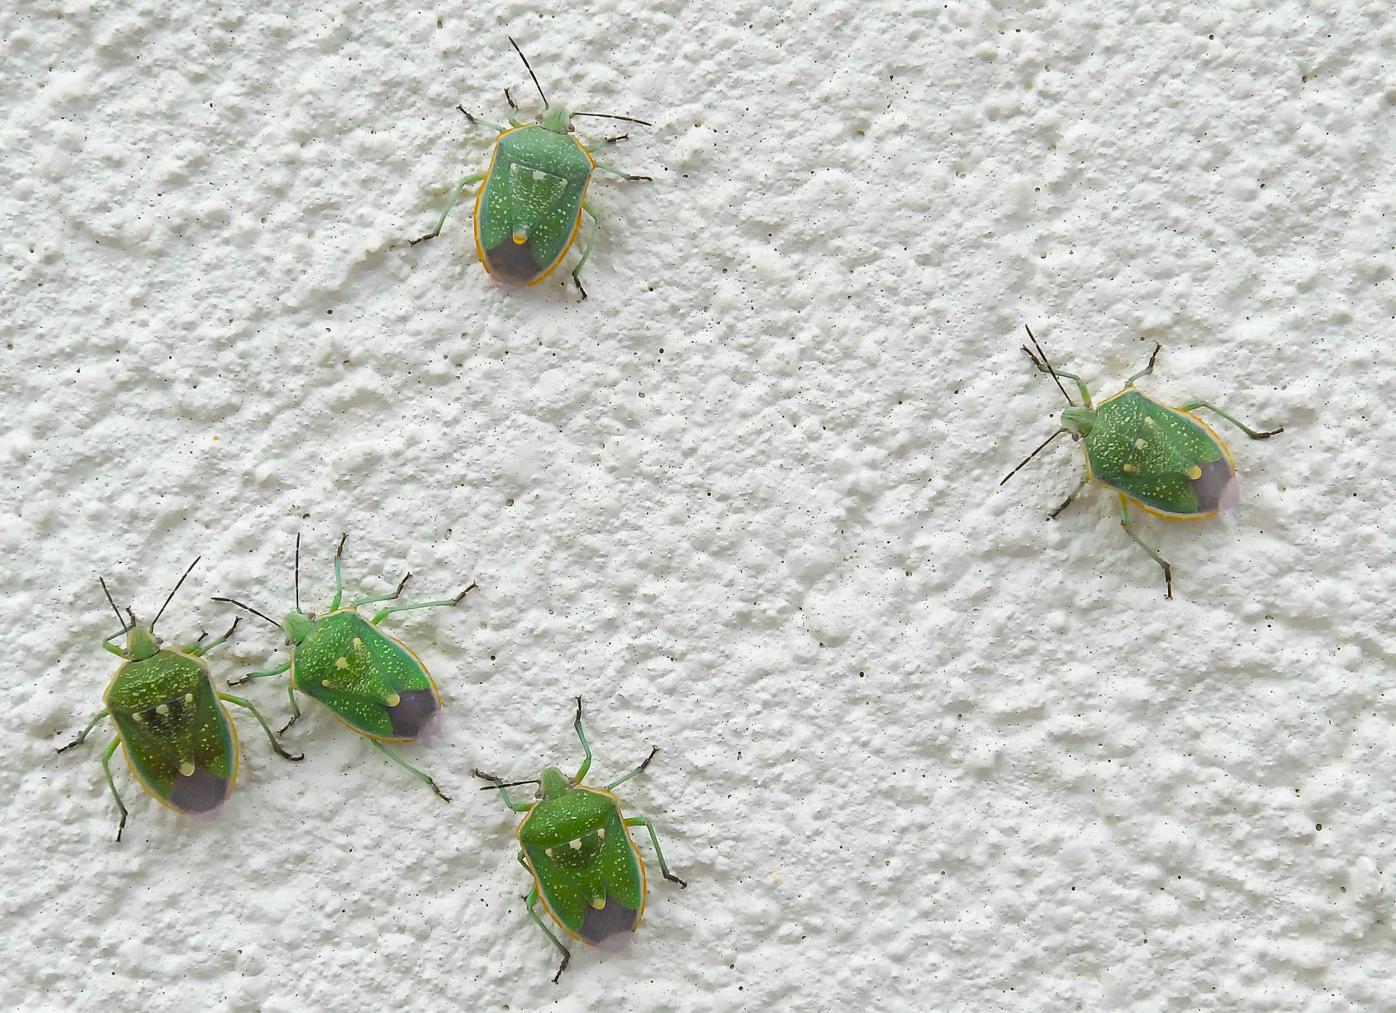 Stink bug swarms spotted in Smithfield, Local News